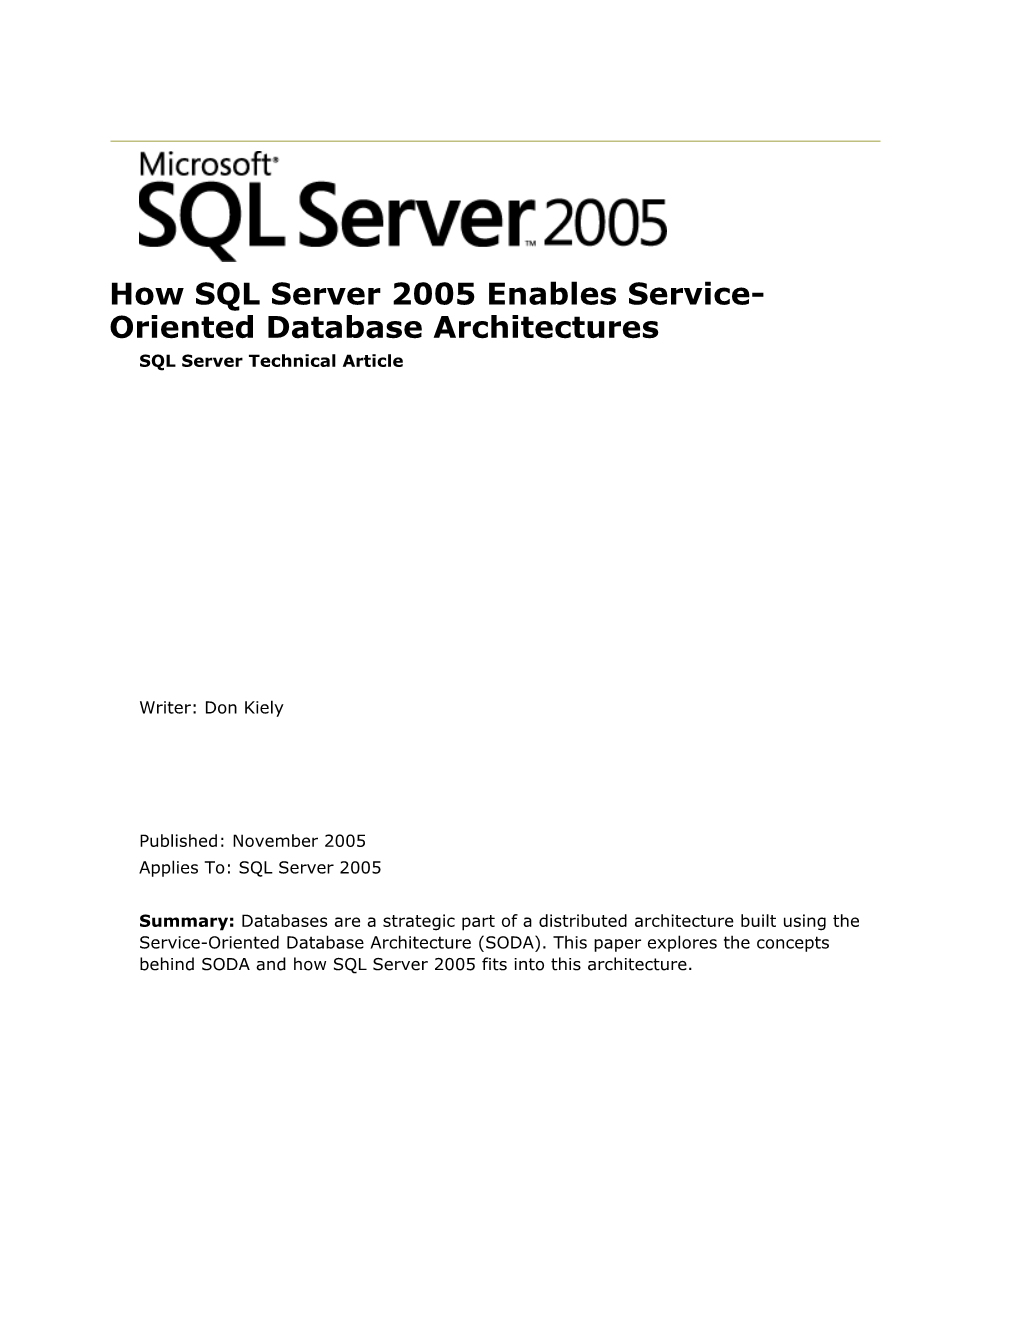 How SQL Server 2005 Enablesservice-Oriented Database Architectures